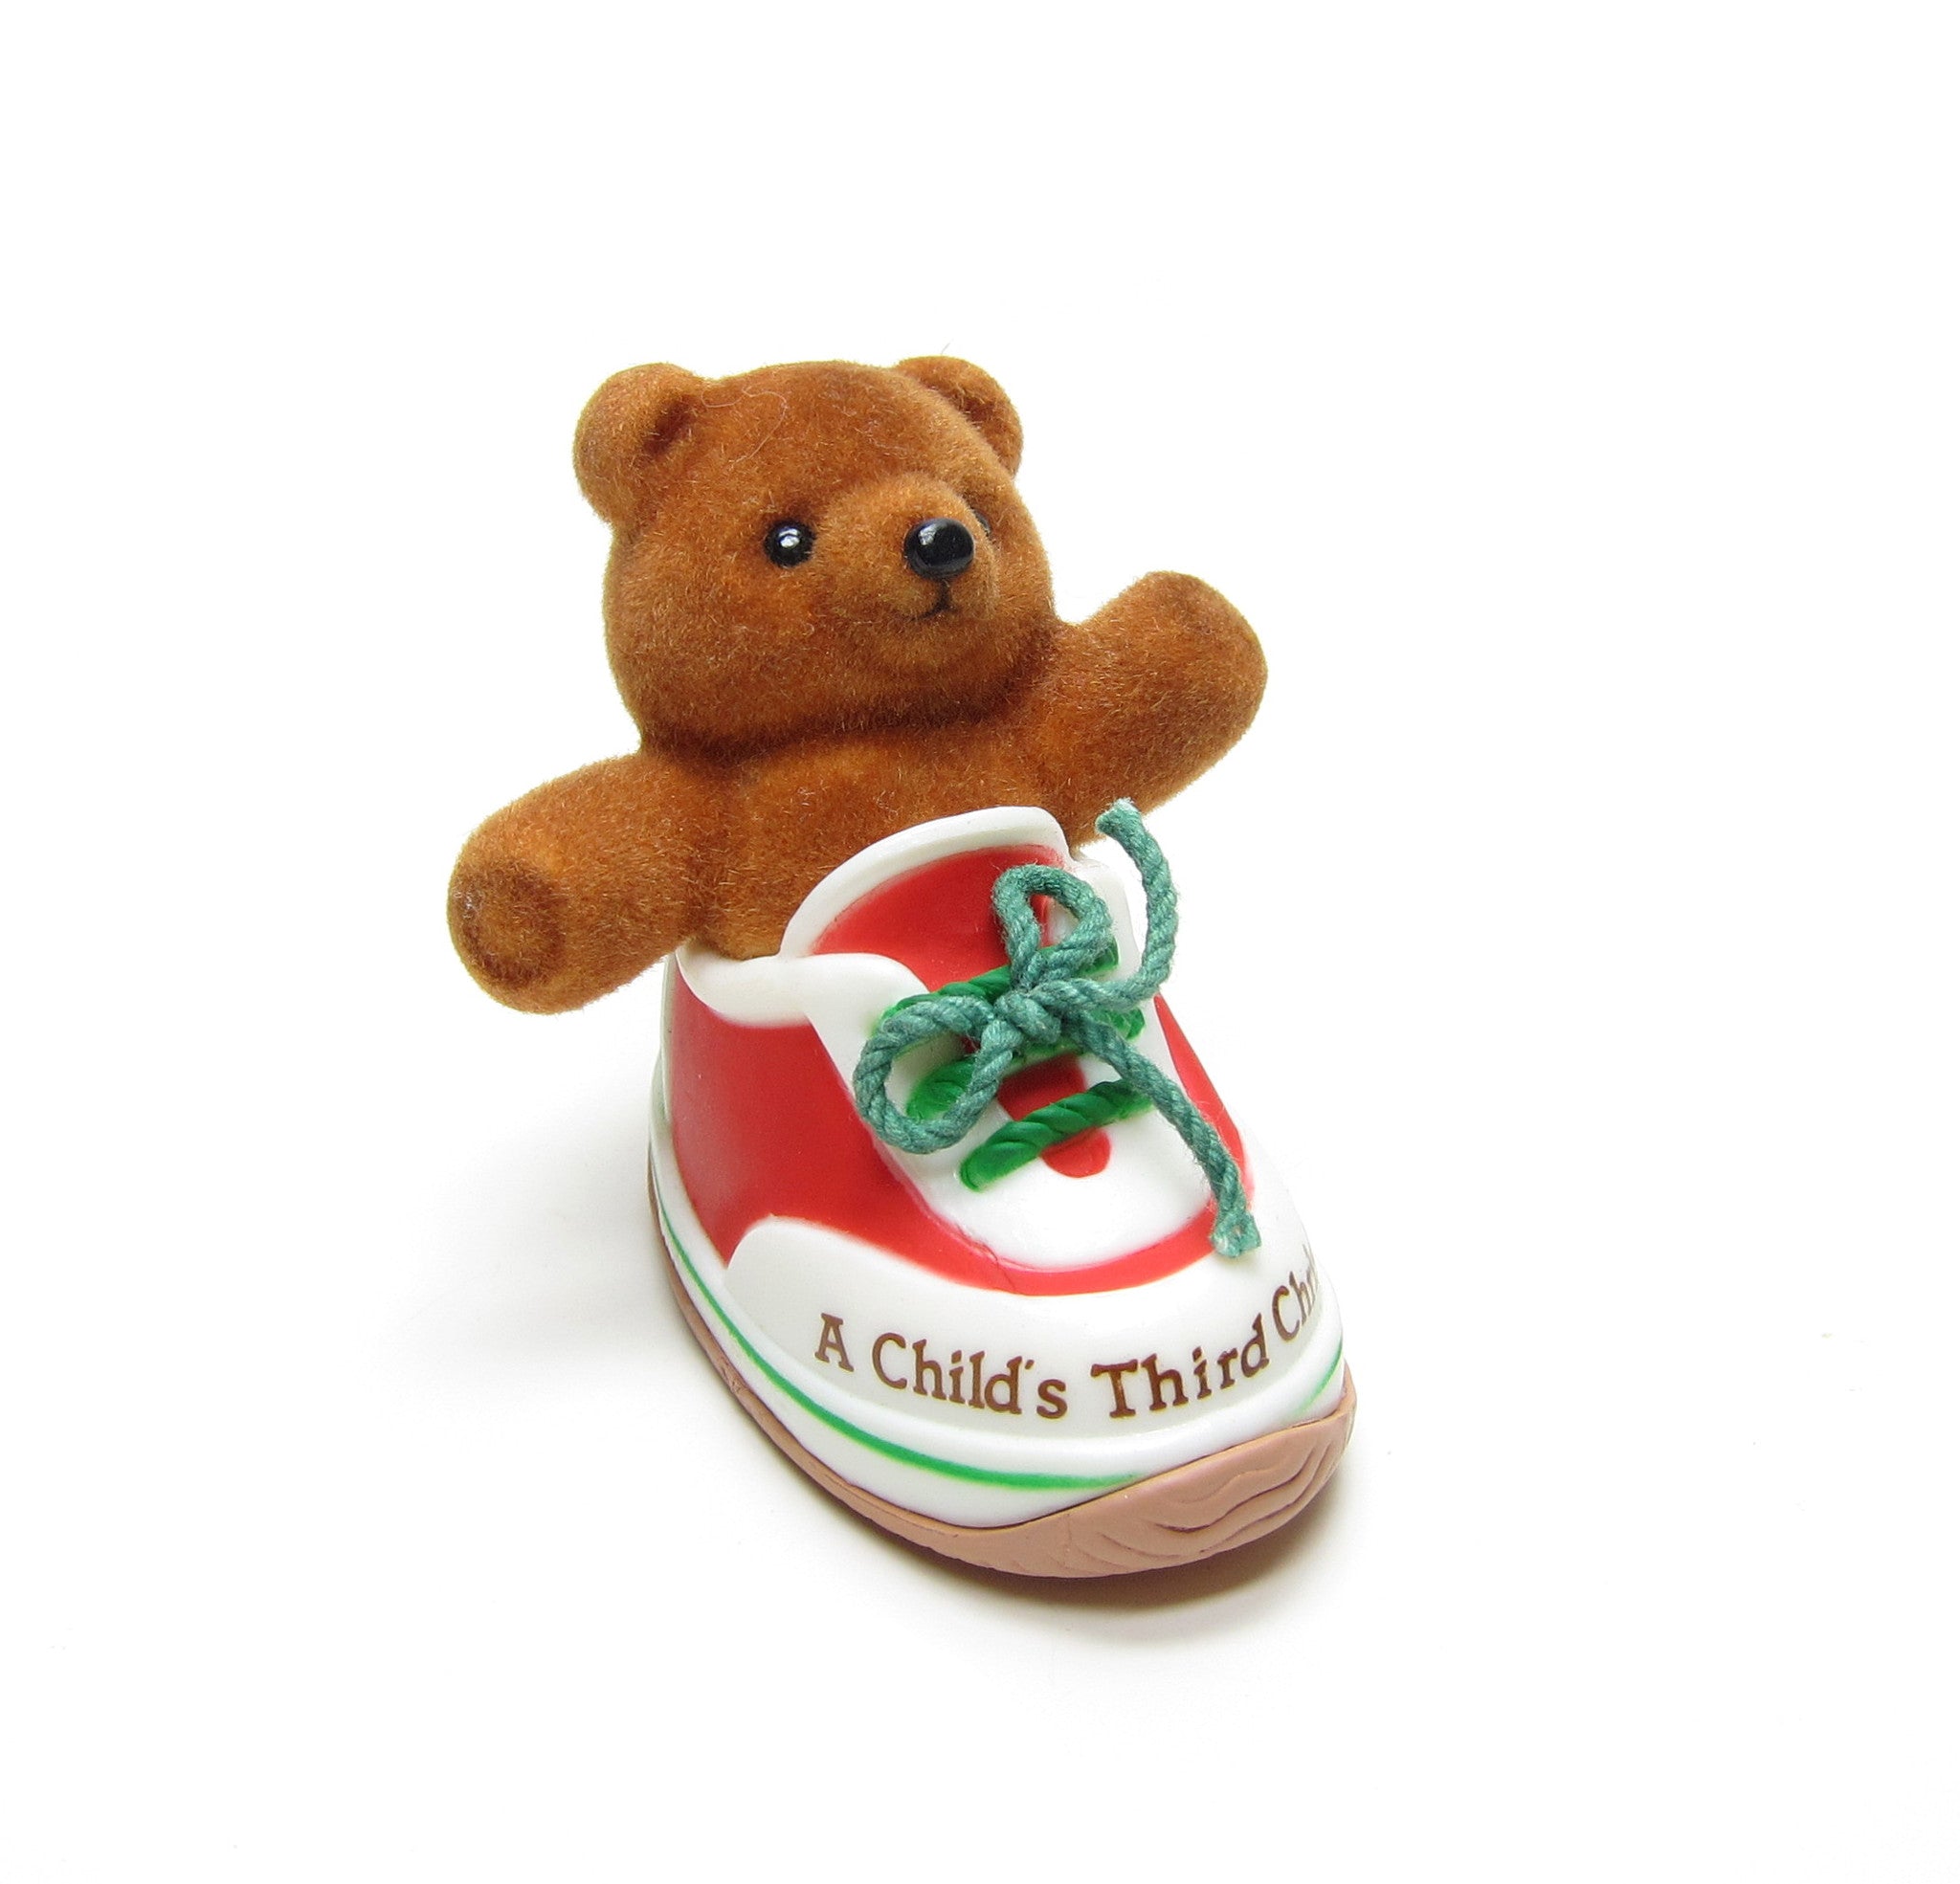 A Child's Third Christmas vintage 1985 ornament